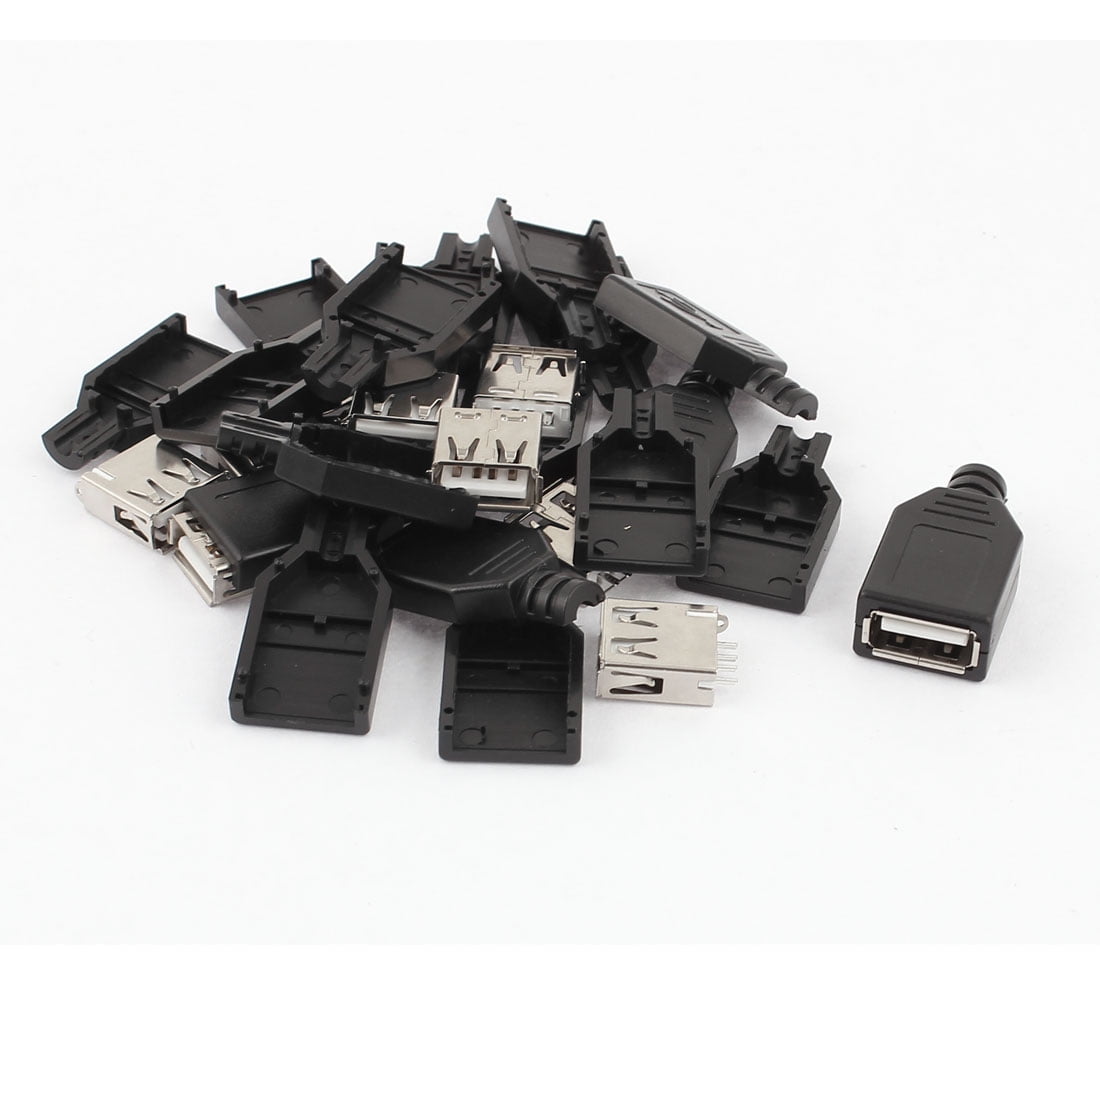 500 Pieces 2.5mm Pitch JST 2.5mm Pitch Male and Female Pin Header SM JST Connector Kit 4 Pin Housing JST Adapter Cable Connector Socket Male and Female JST SM Crimp DIP Kit.